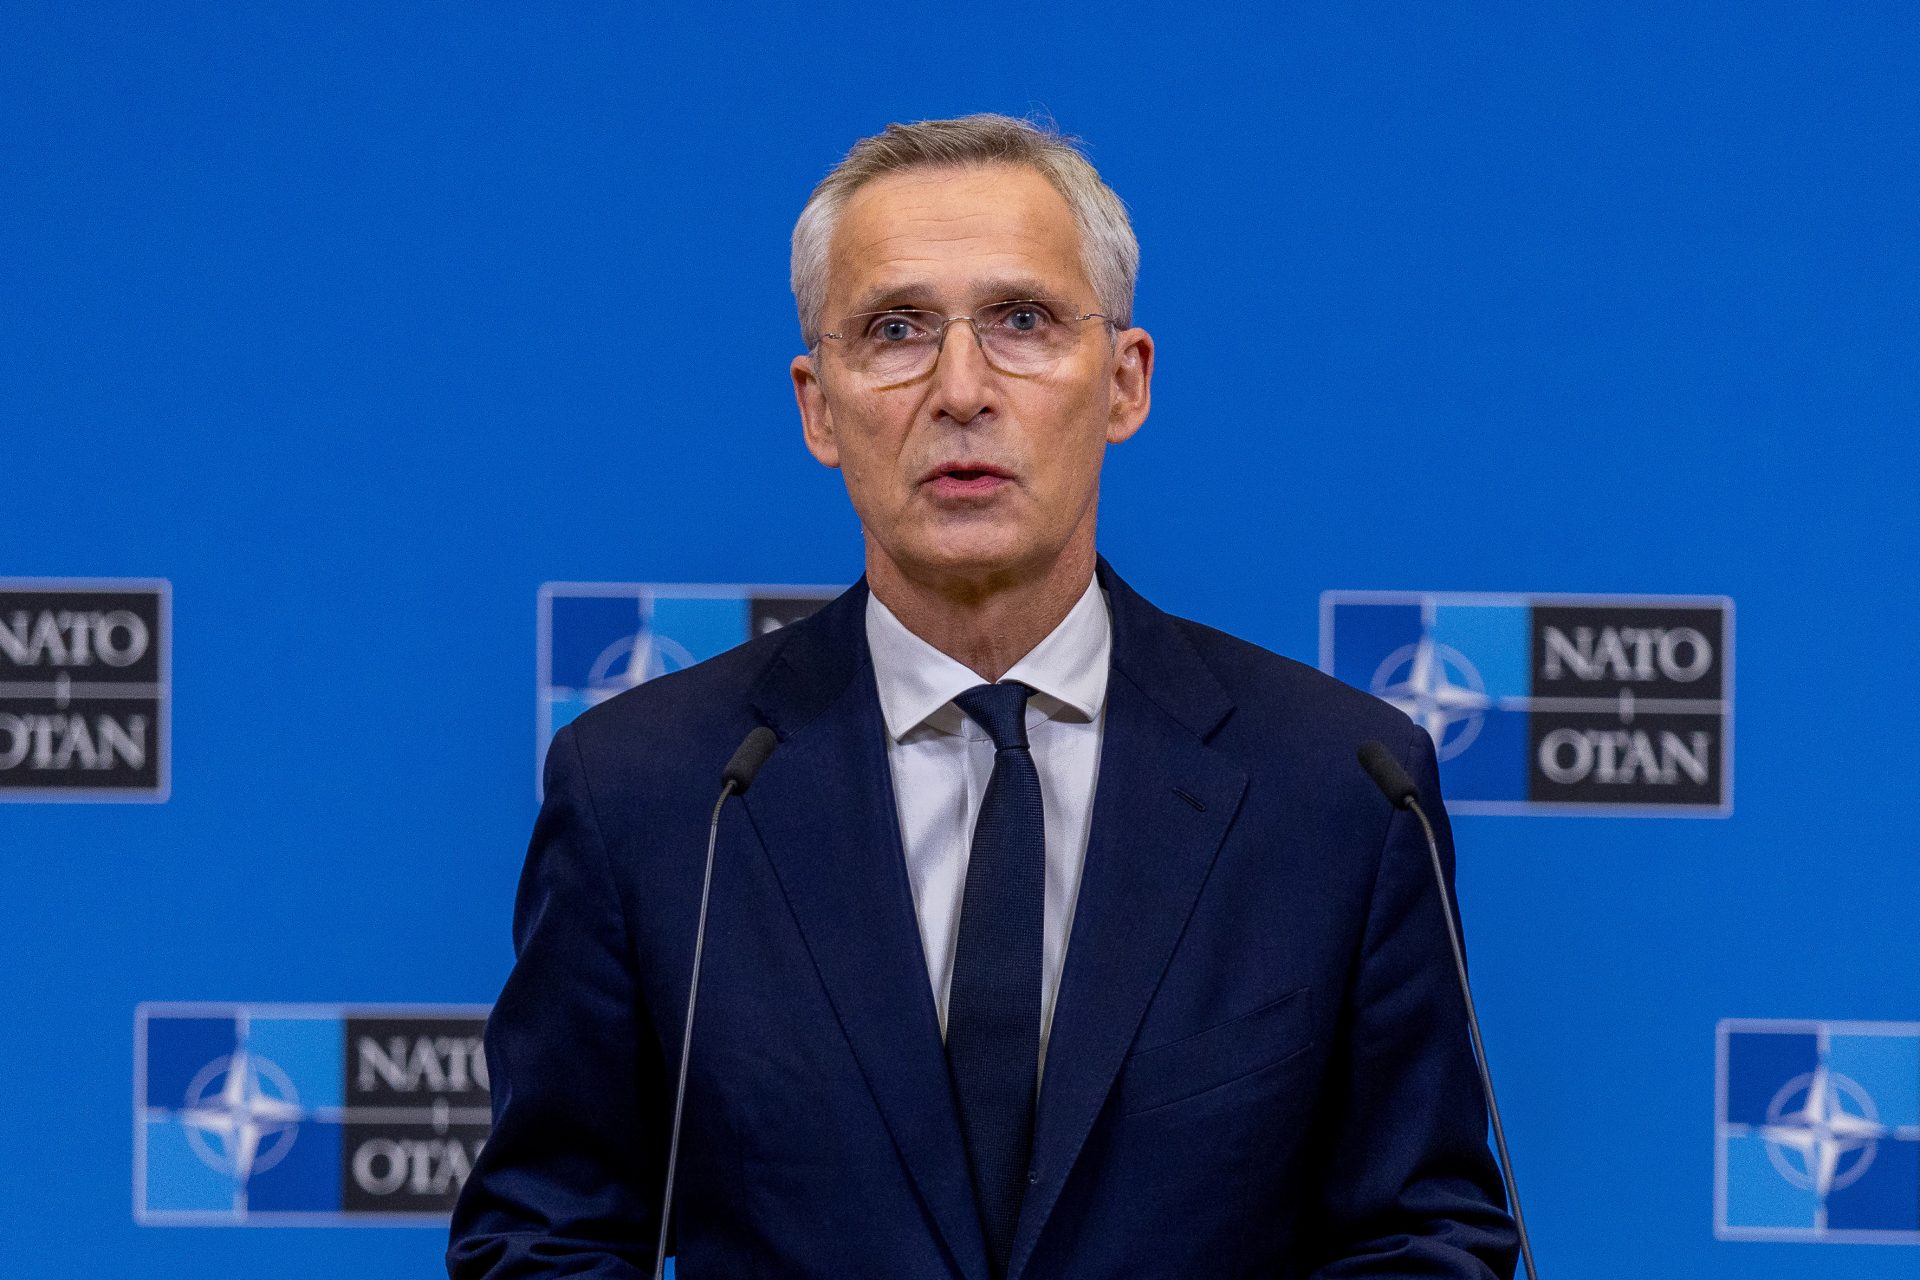 Comments from the NATO General Secretary